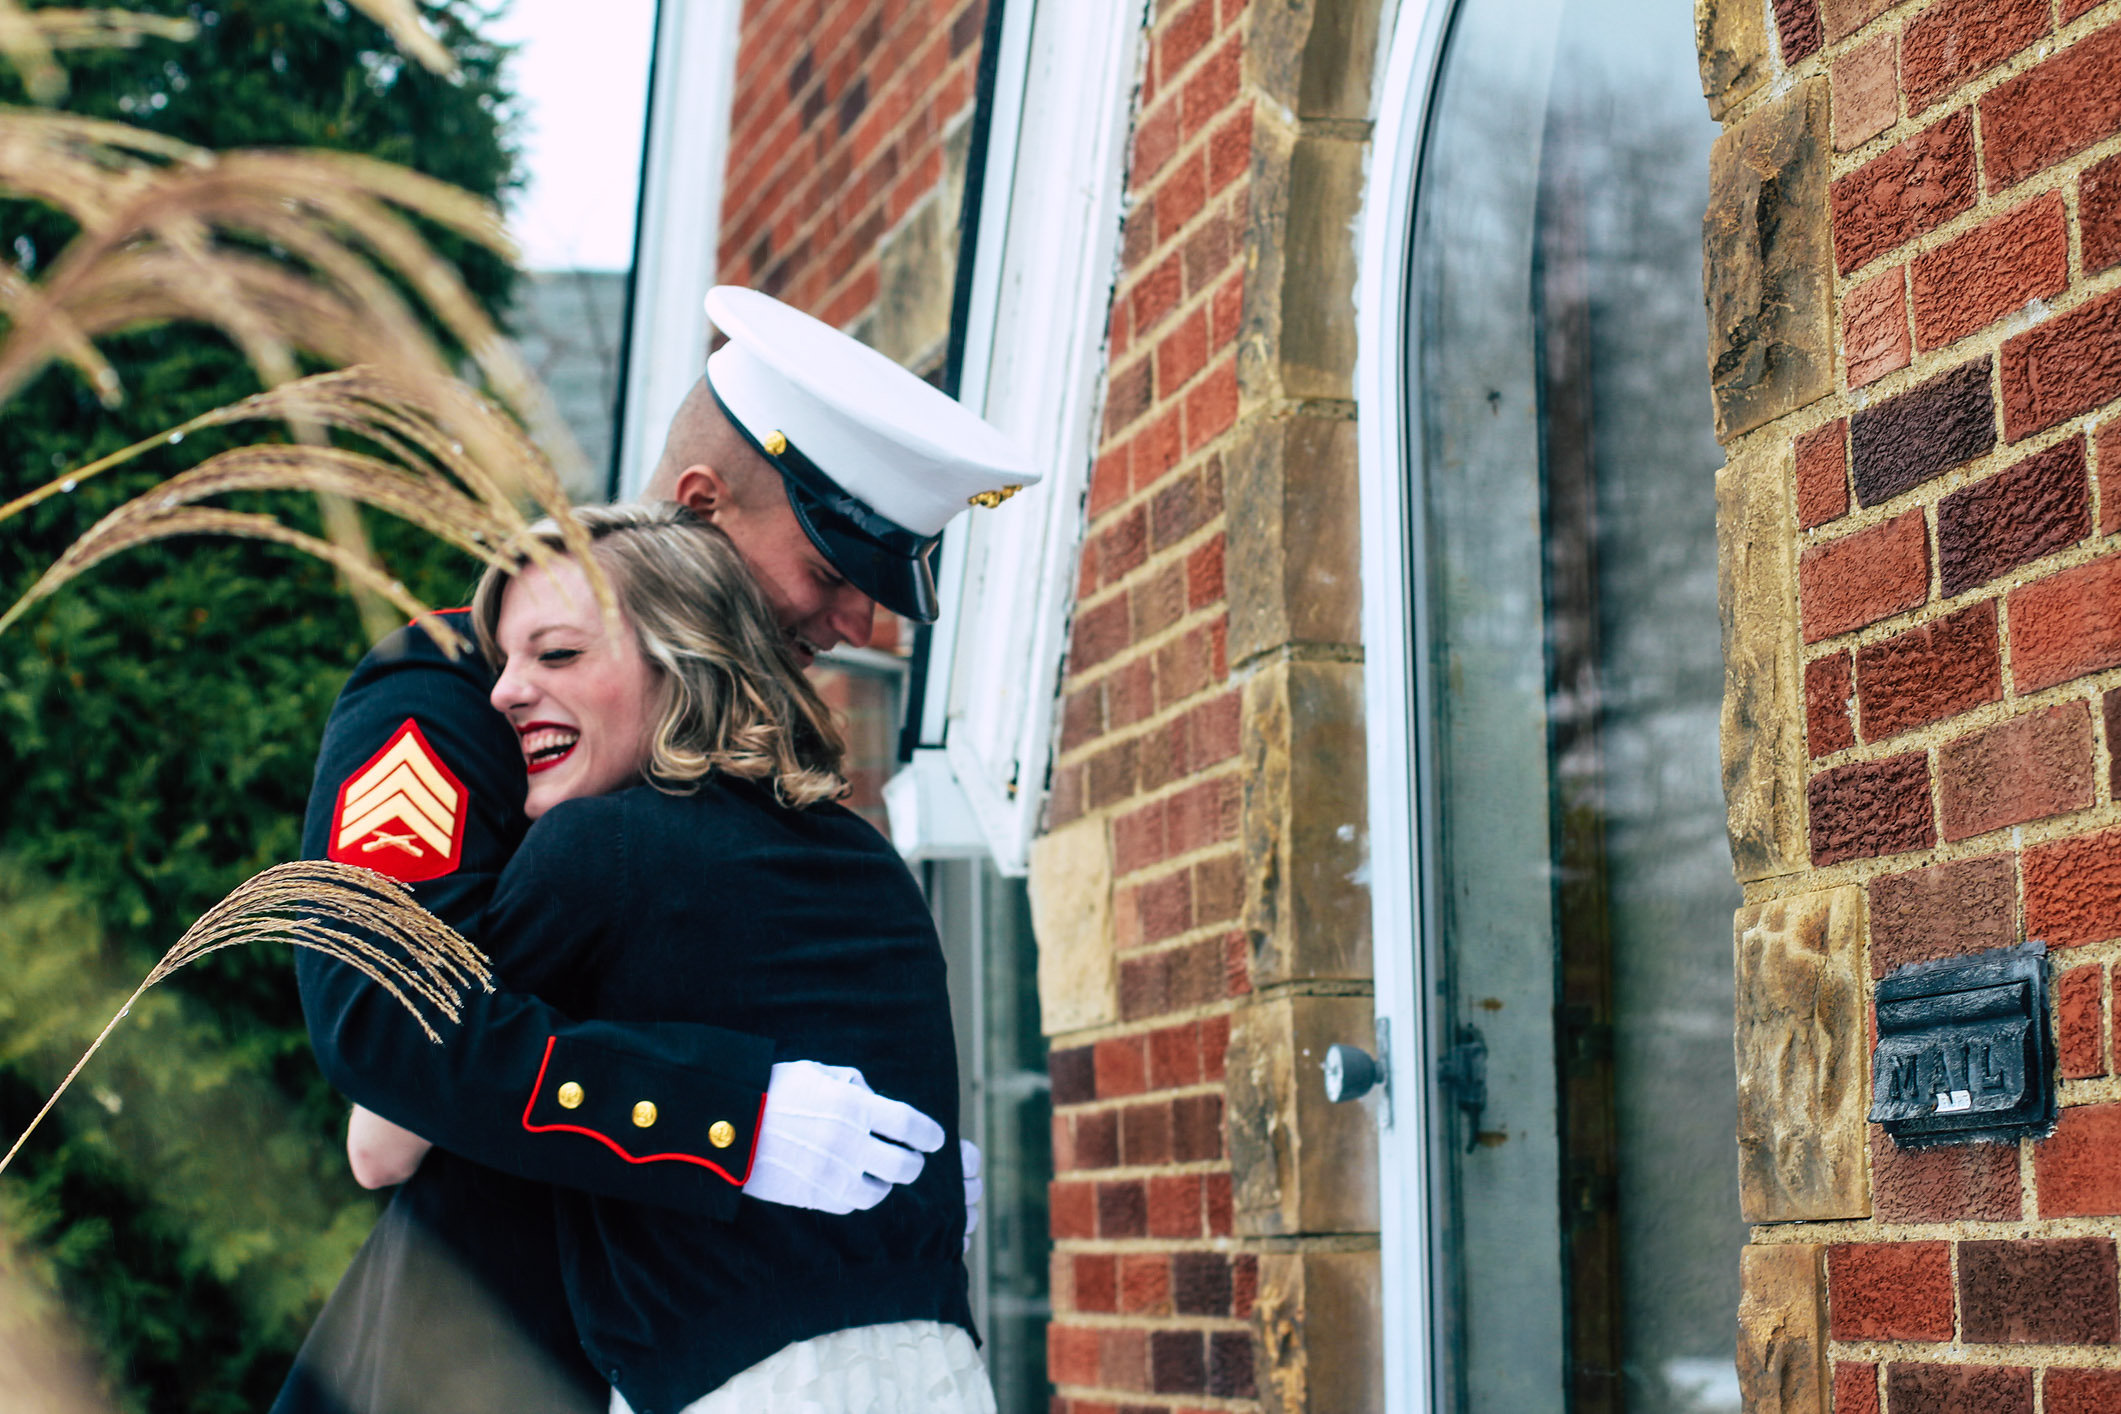 PHOTO: Jon Trommer, a Marine, surprised his girlfriend by popping the question on her snowy doorstep.